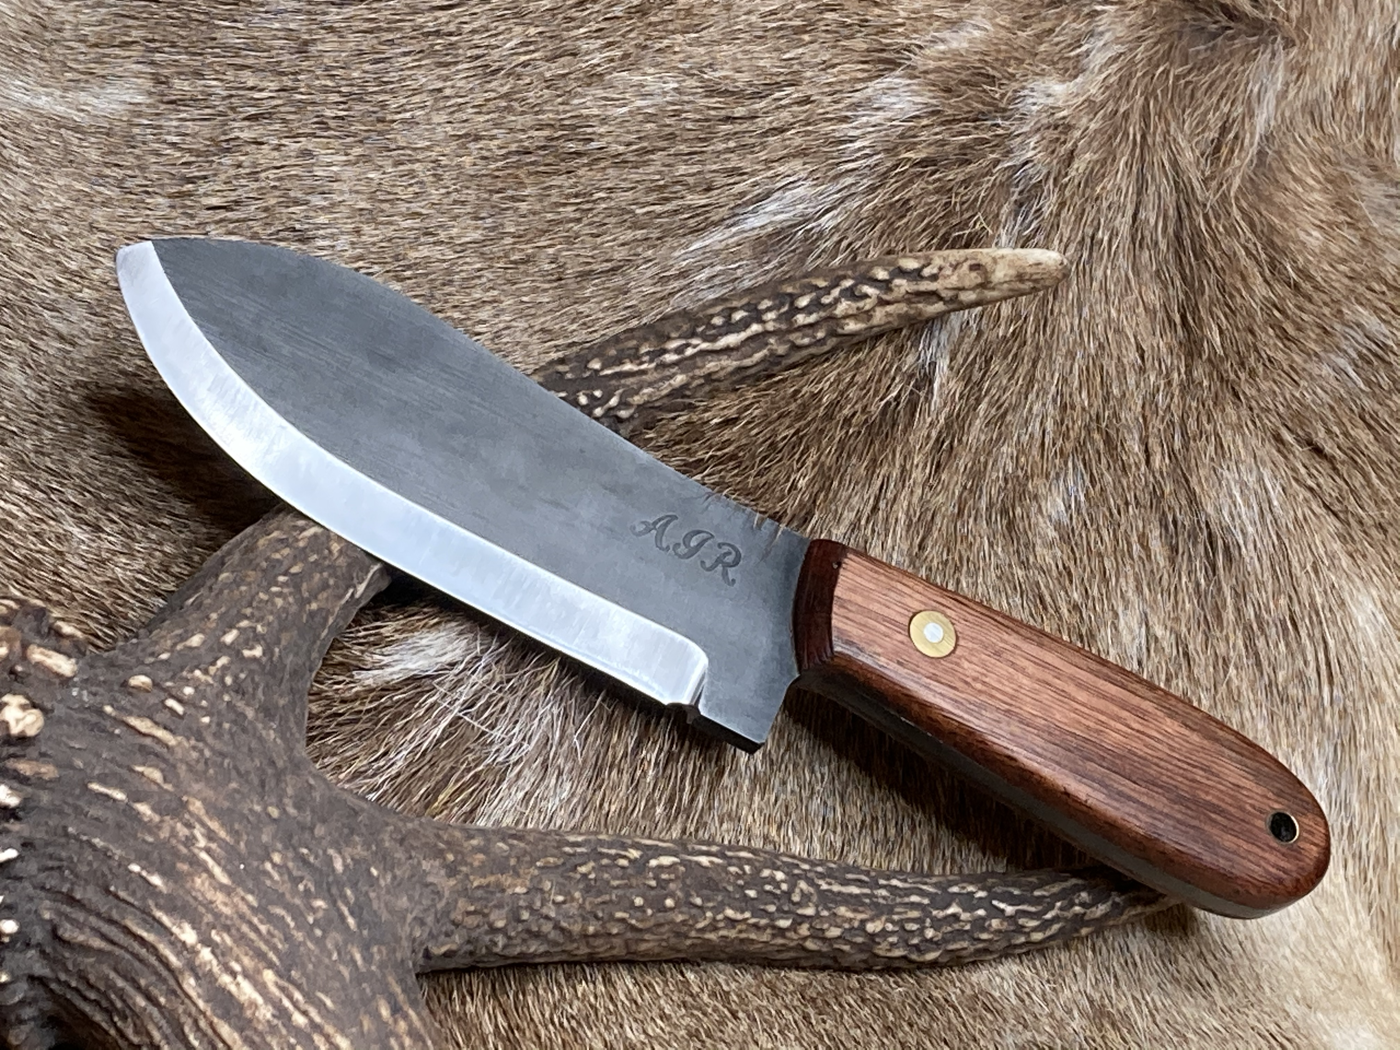 Best Bushcraft Knife - The Great Scandi Grind Controversy